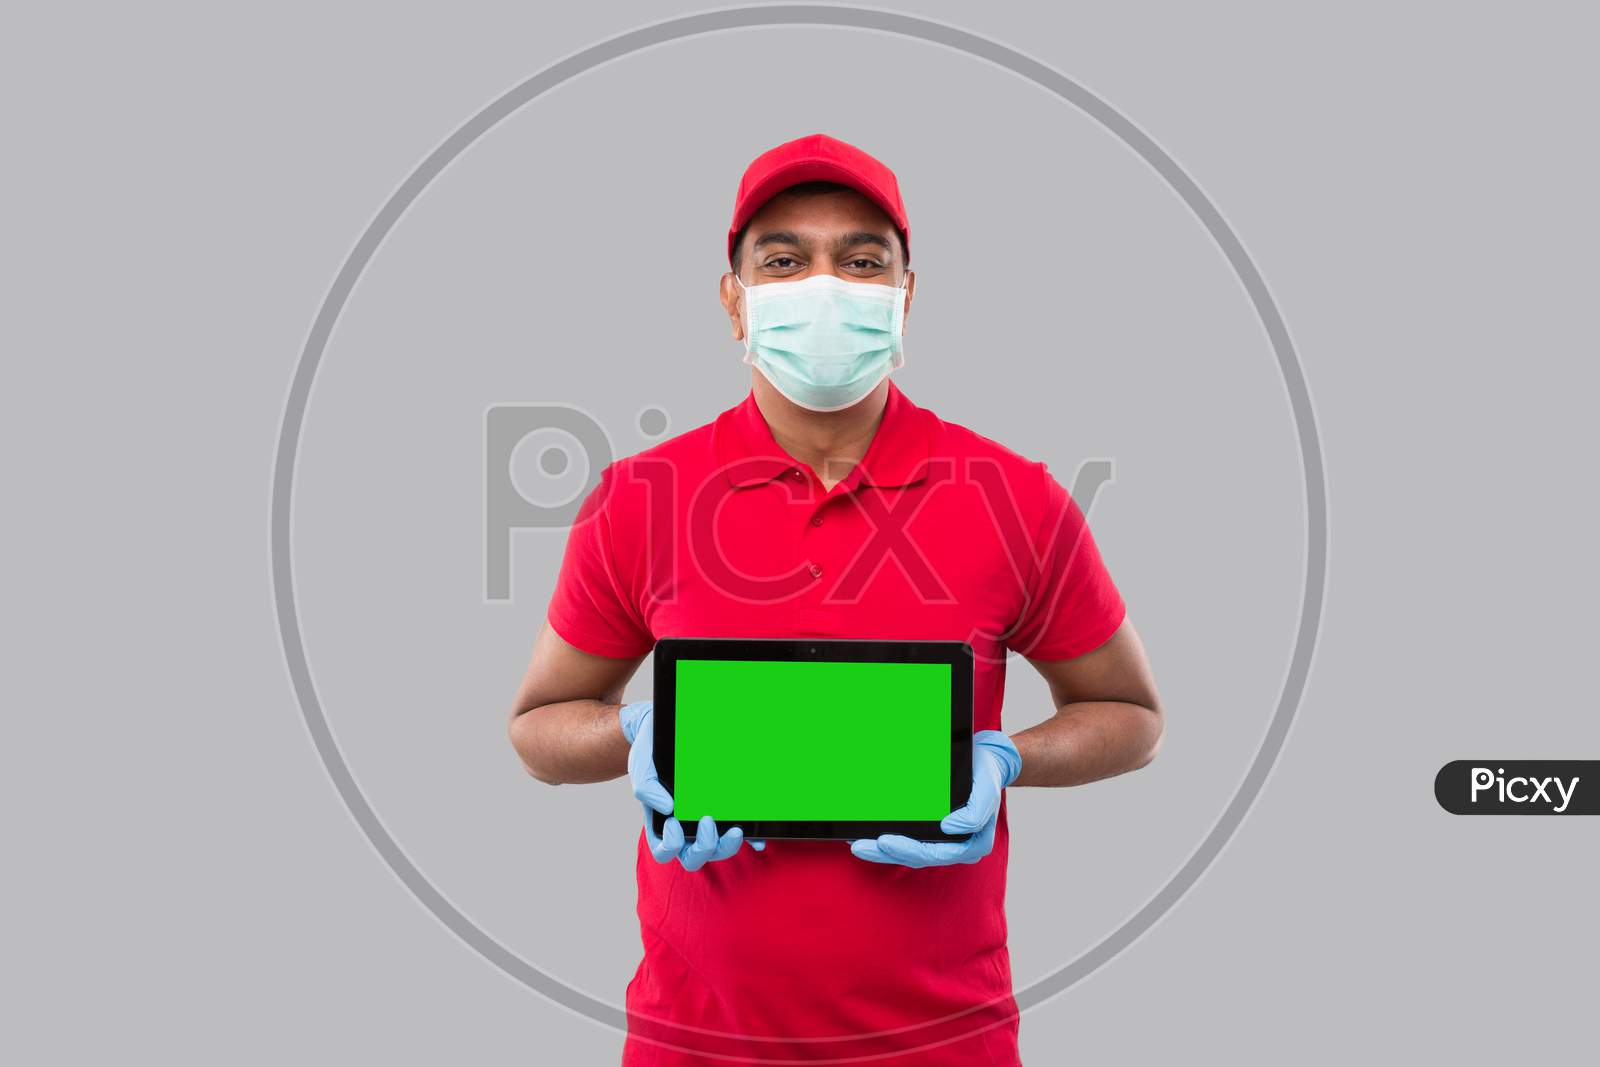 Delivery Man Showing Tablet Wearing Medical Mask And Gloves. Indian Delivery Boy With Tablet In Hands. Home Delivery, Technical Delivery